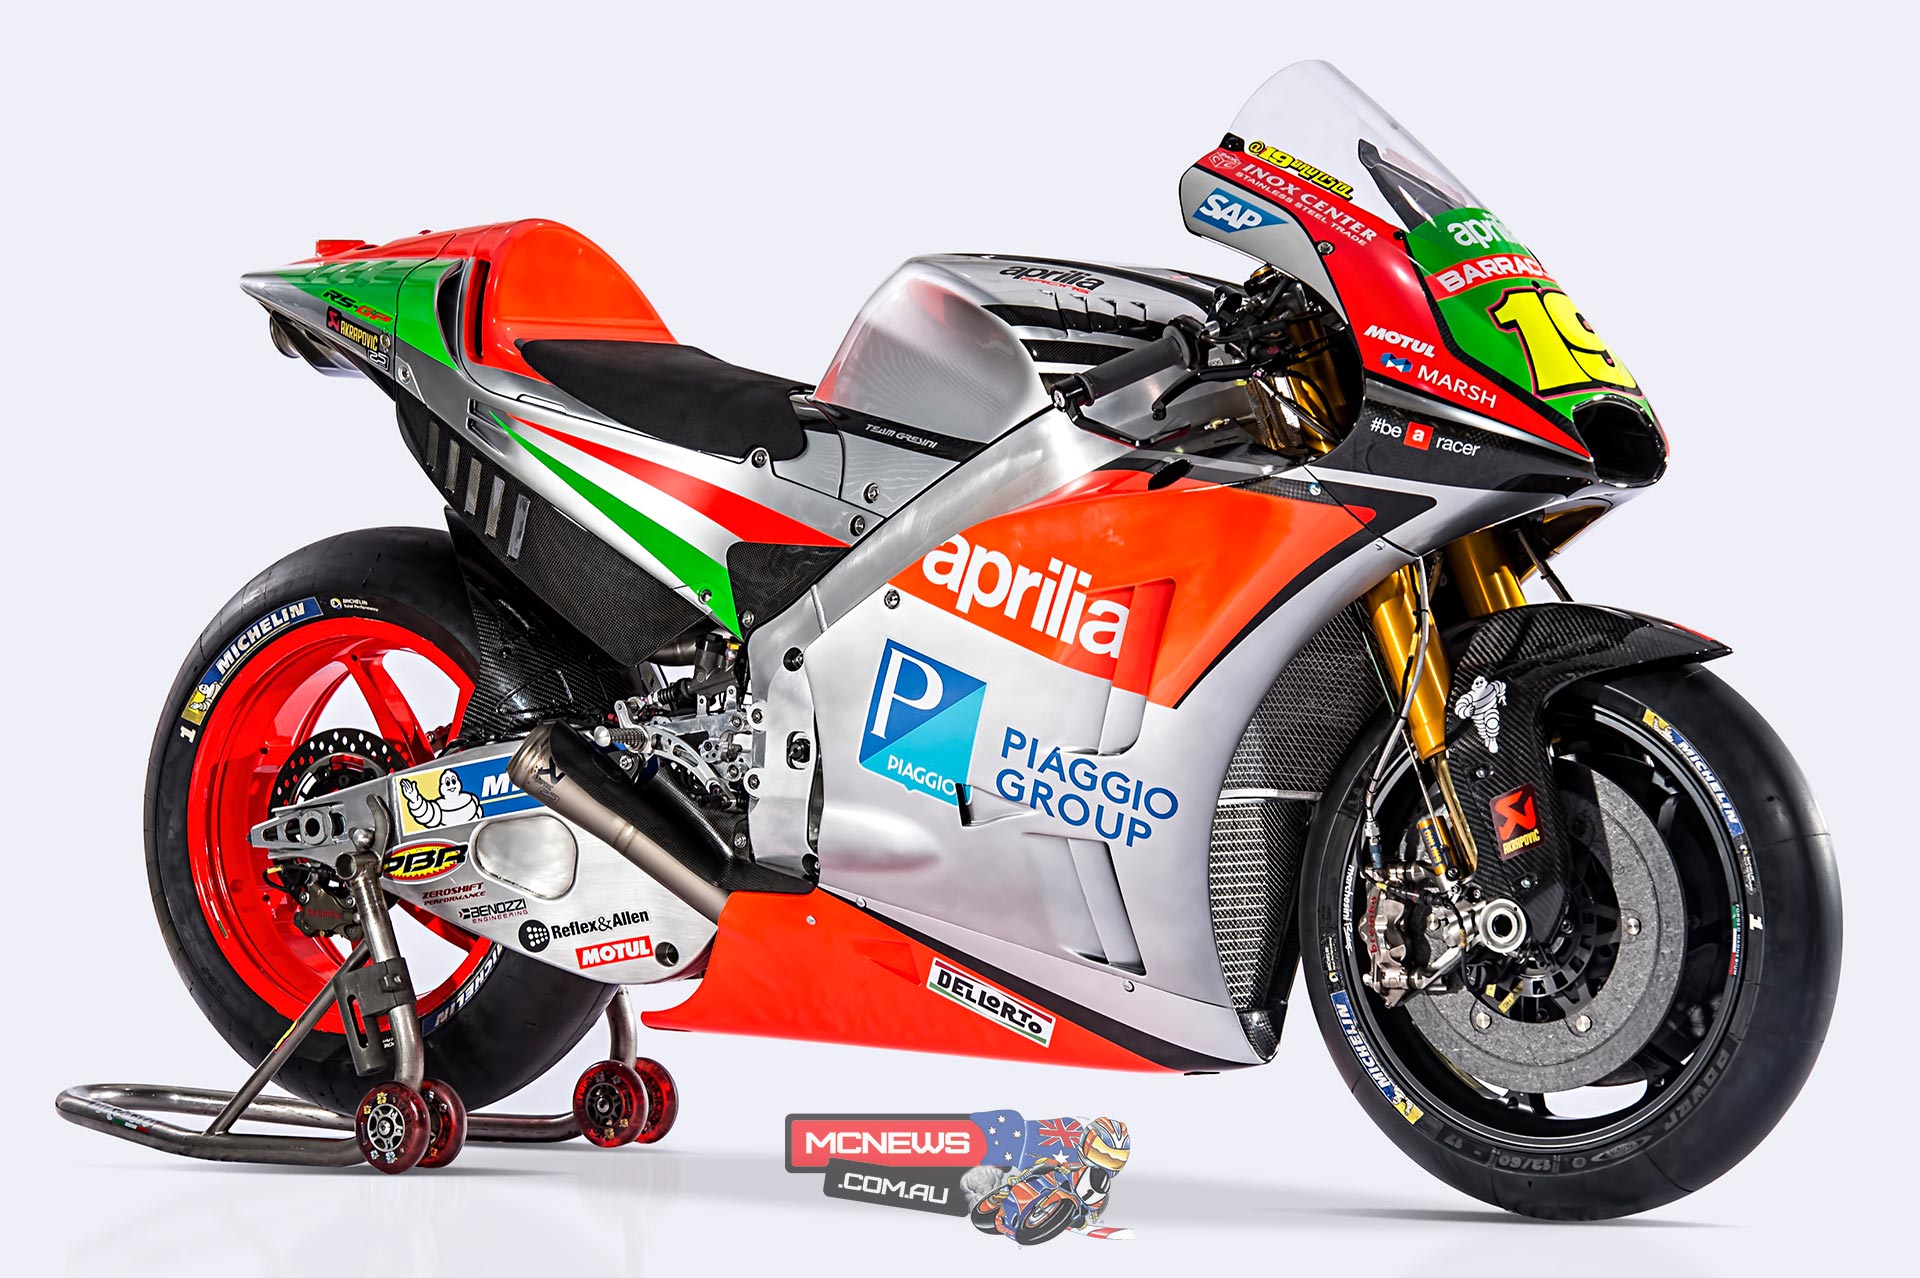 Aprilia Racing: history of motorcycling with 54 world titles